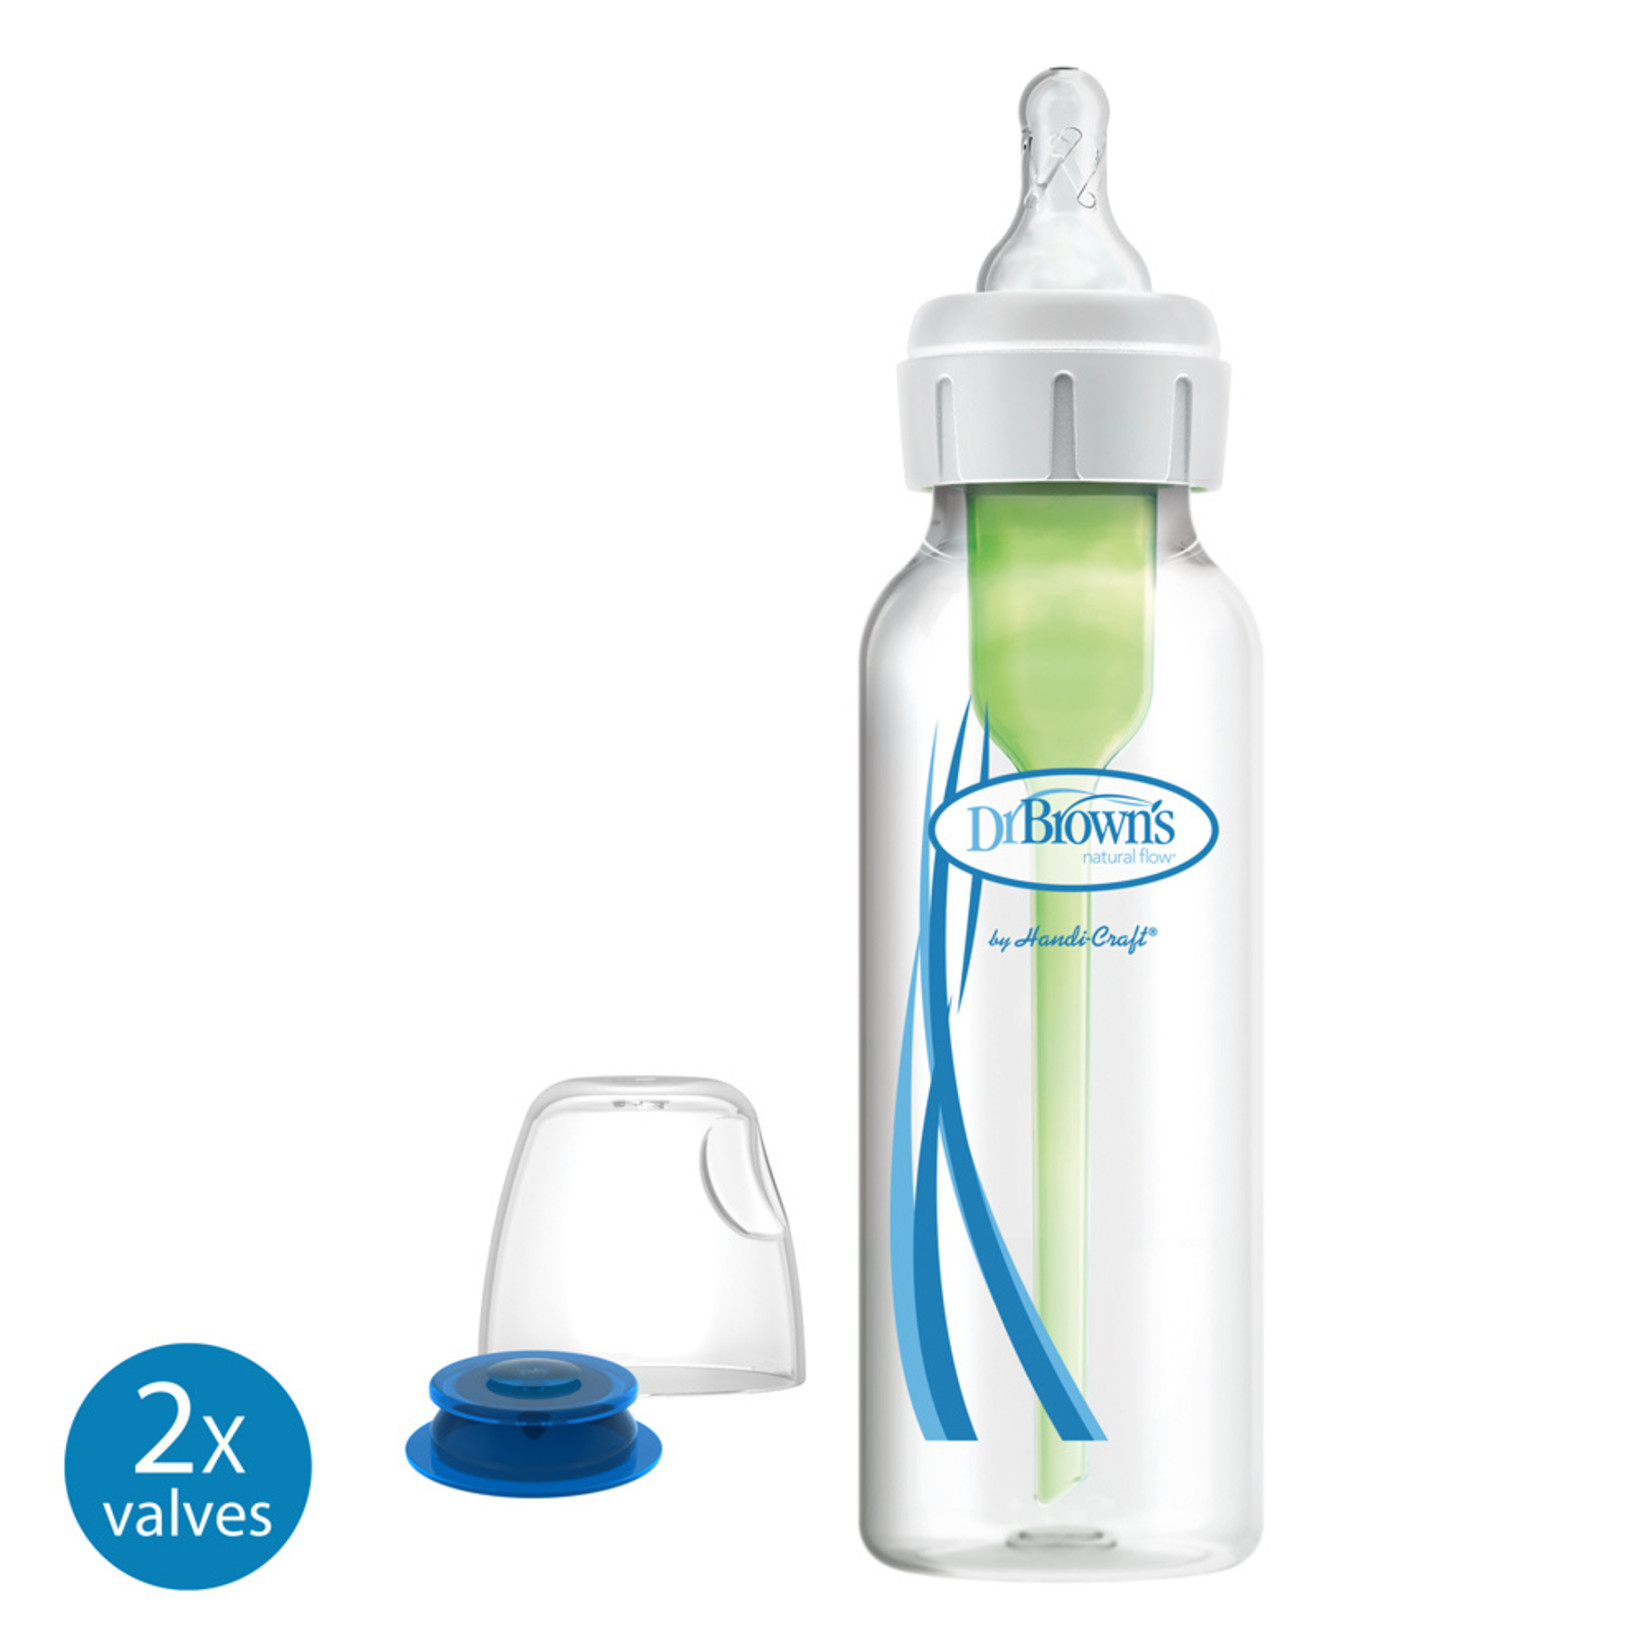 Dr. Brown's Dr. Brown’s Options+ Anti-colic Bottle | Specialty Feeding System 250ml